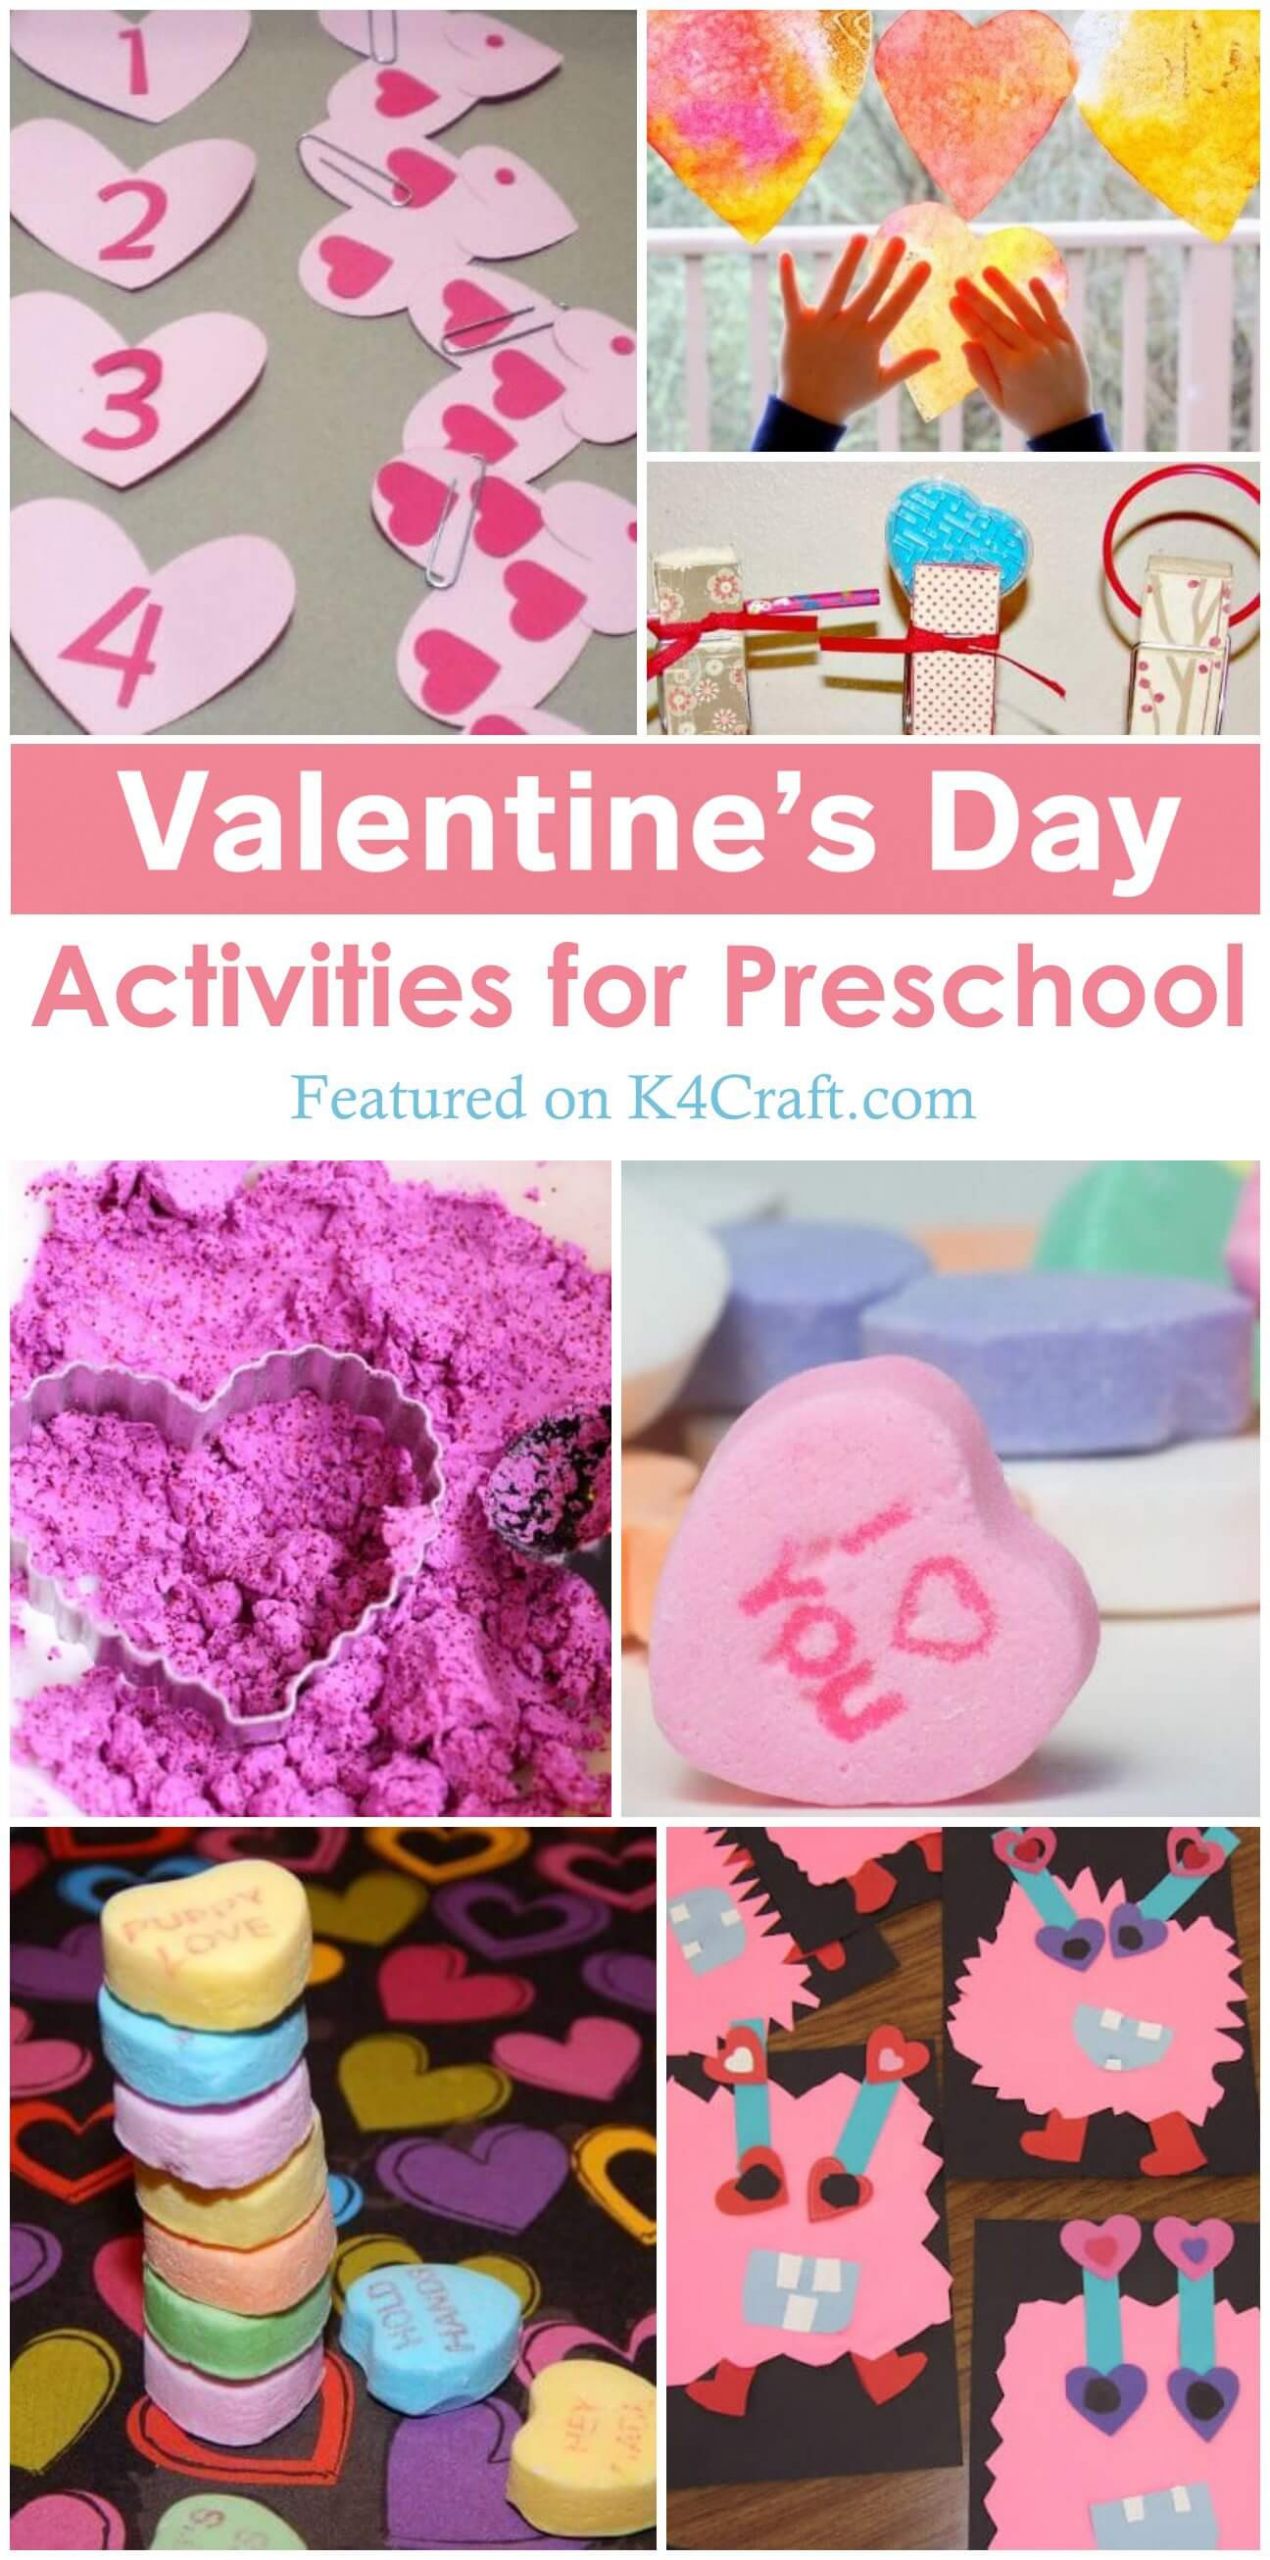 Valentines Day Activities For Toddlers
 Valentines Day Activities for Preschool Kids pin • K4 Craft